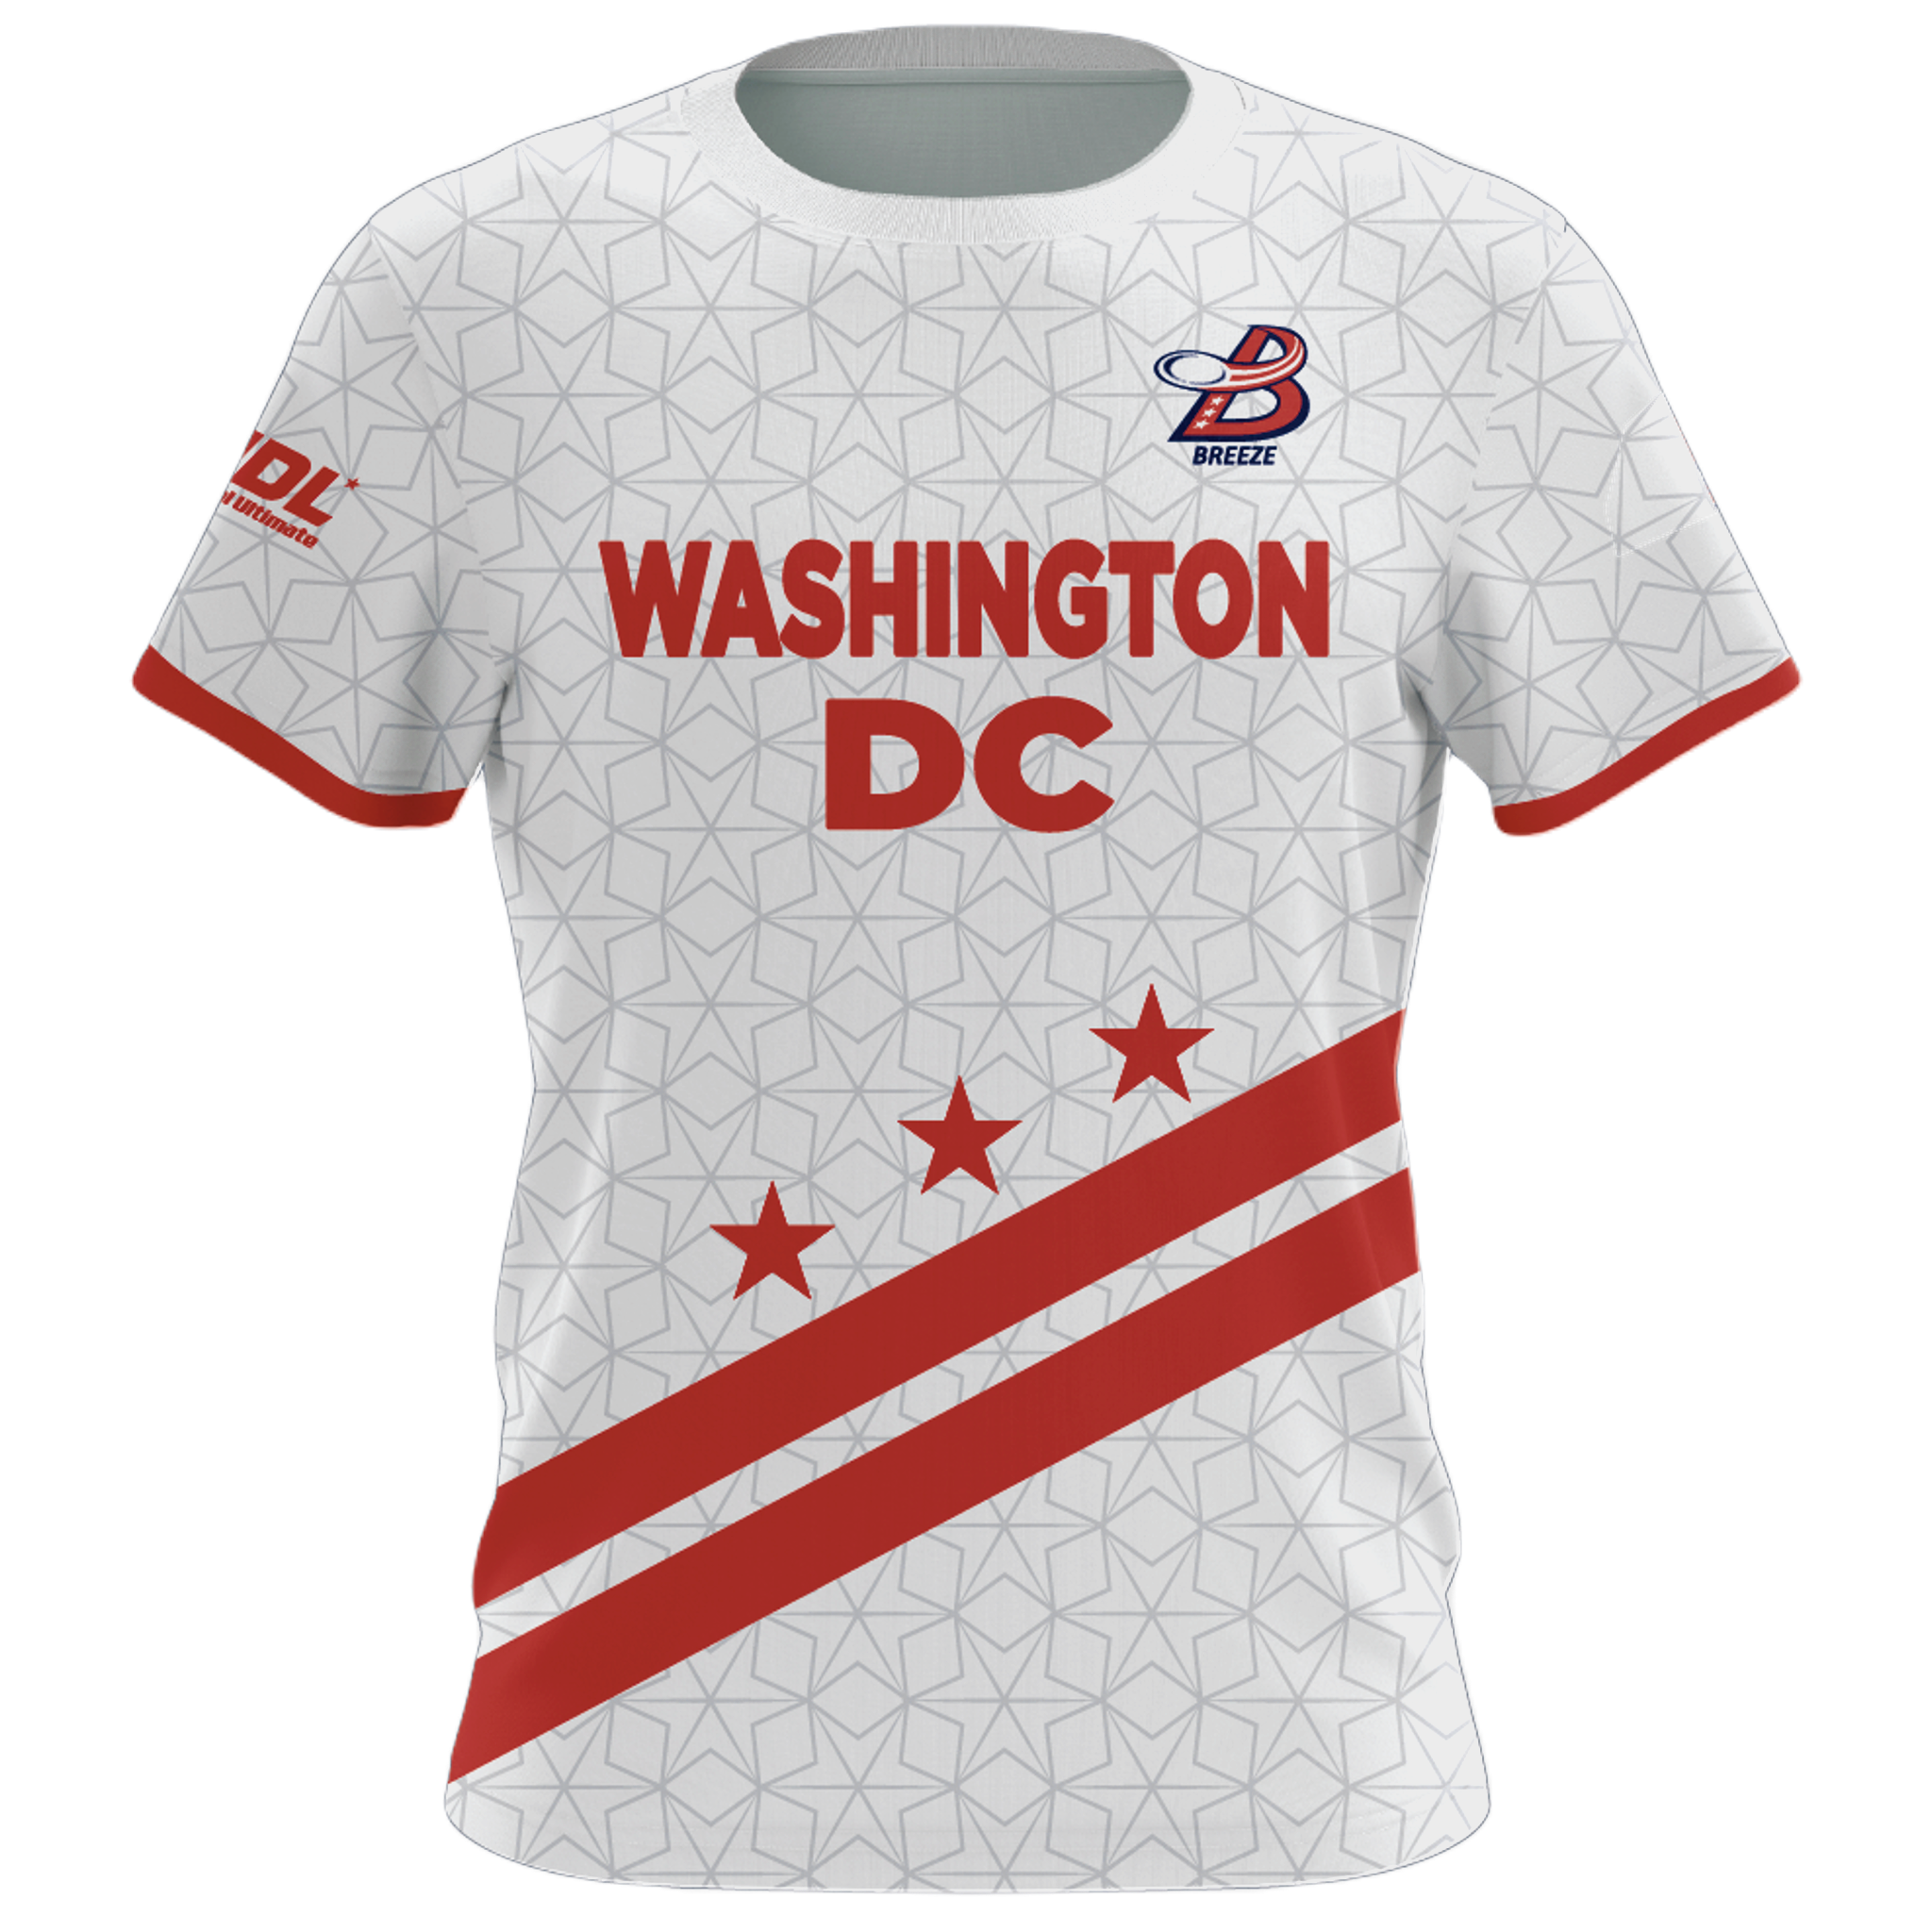 DCB 10 Years Special Edition Jersey (Blank - Ships Immediately!) - DC Breeze